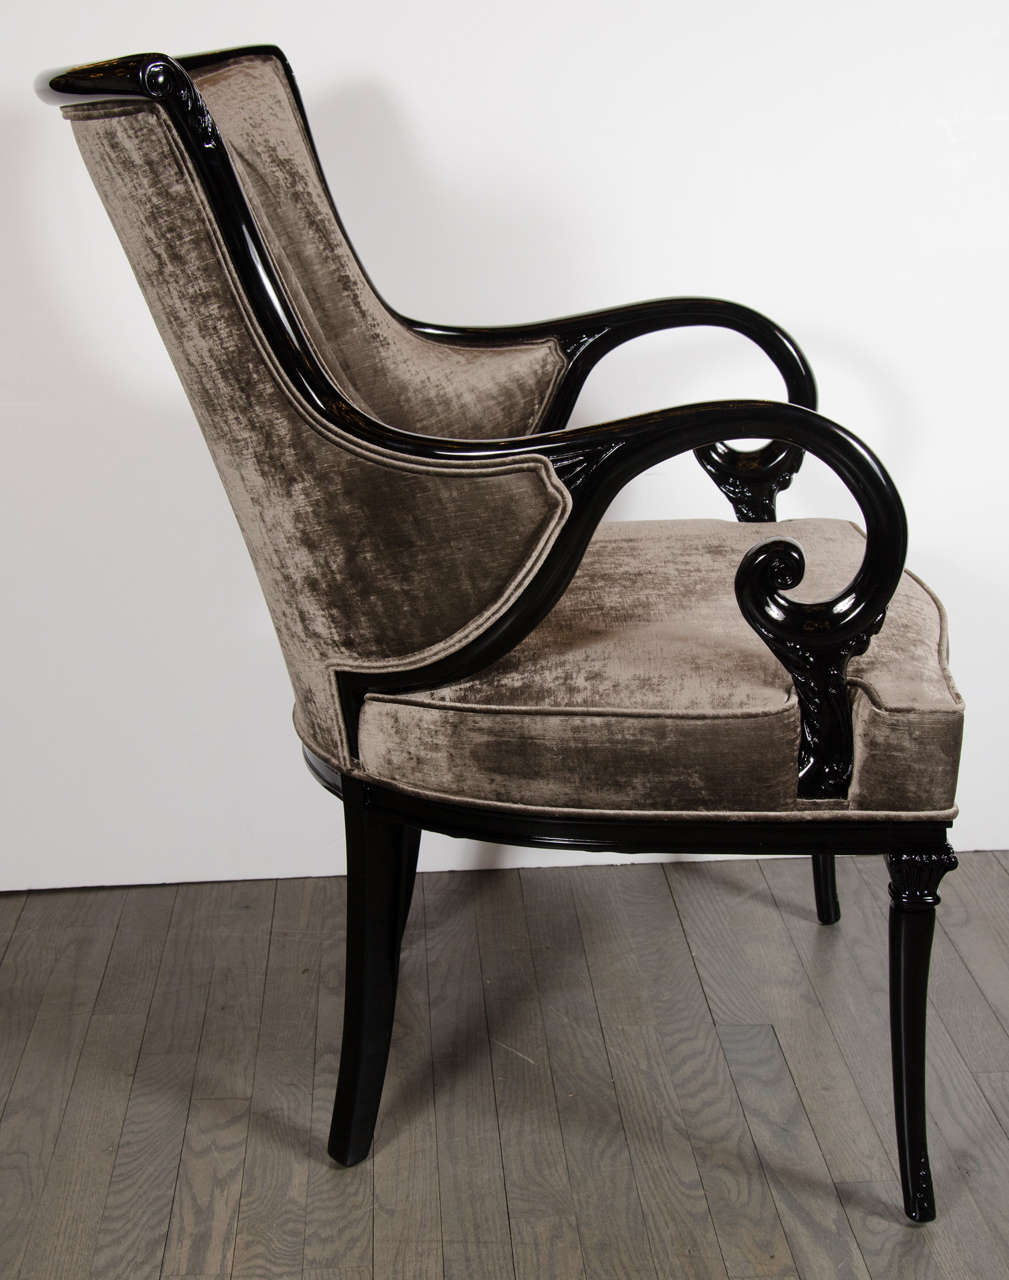 Mid-20th Century Pair of Elegant Scroll-Form Neoclassical Chairs by Grosfeld House